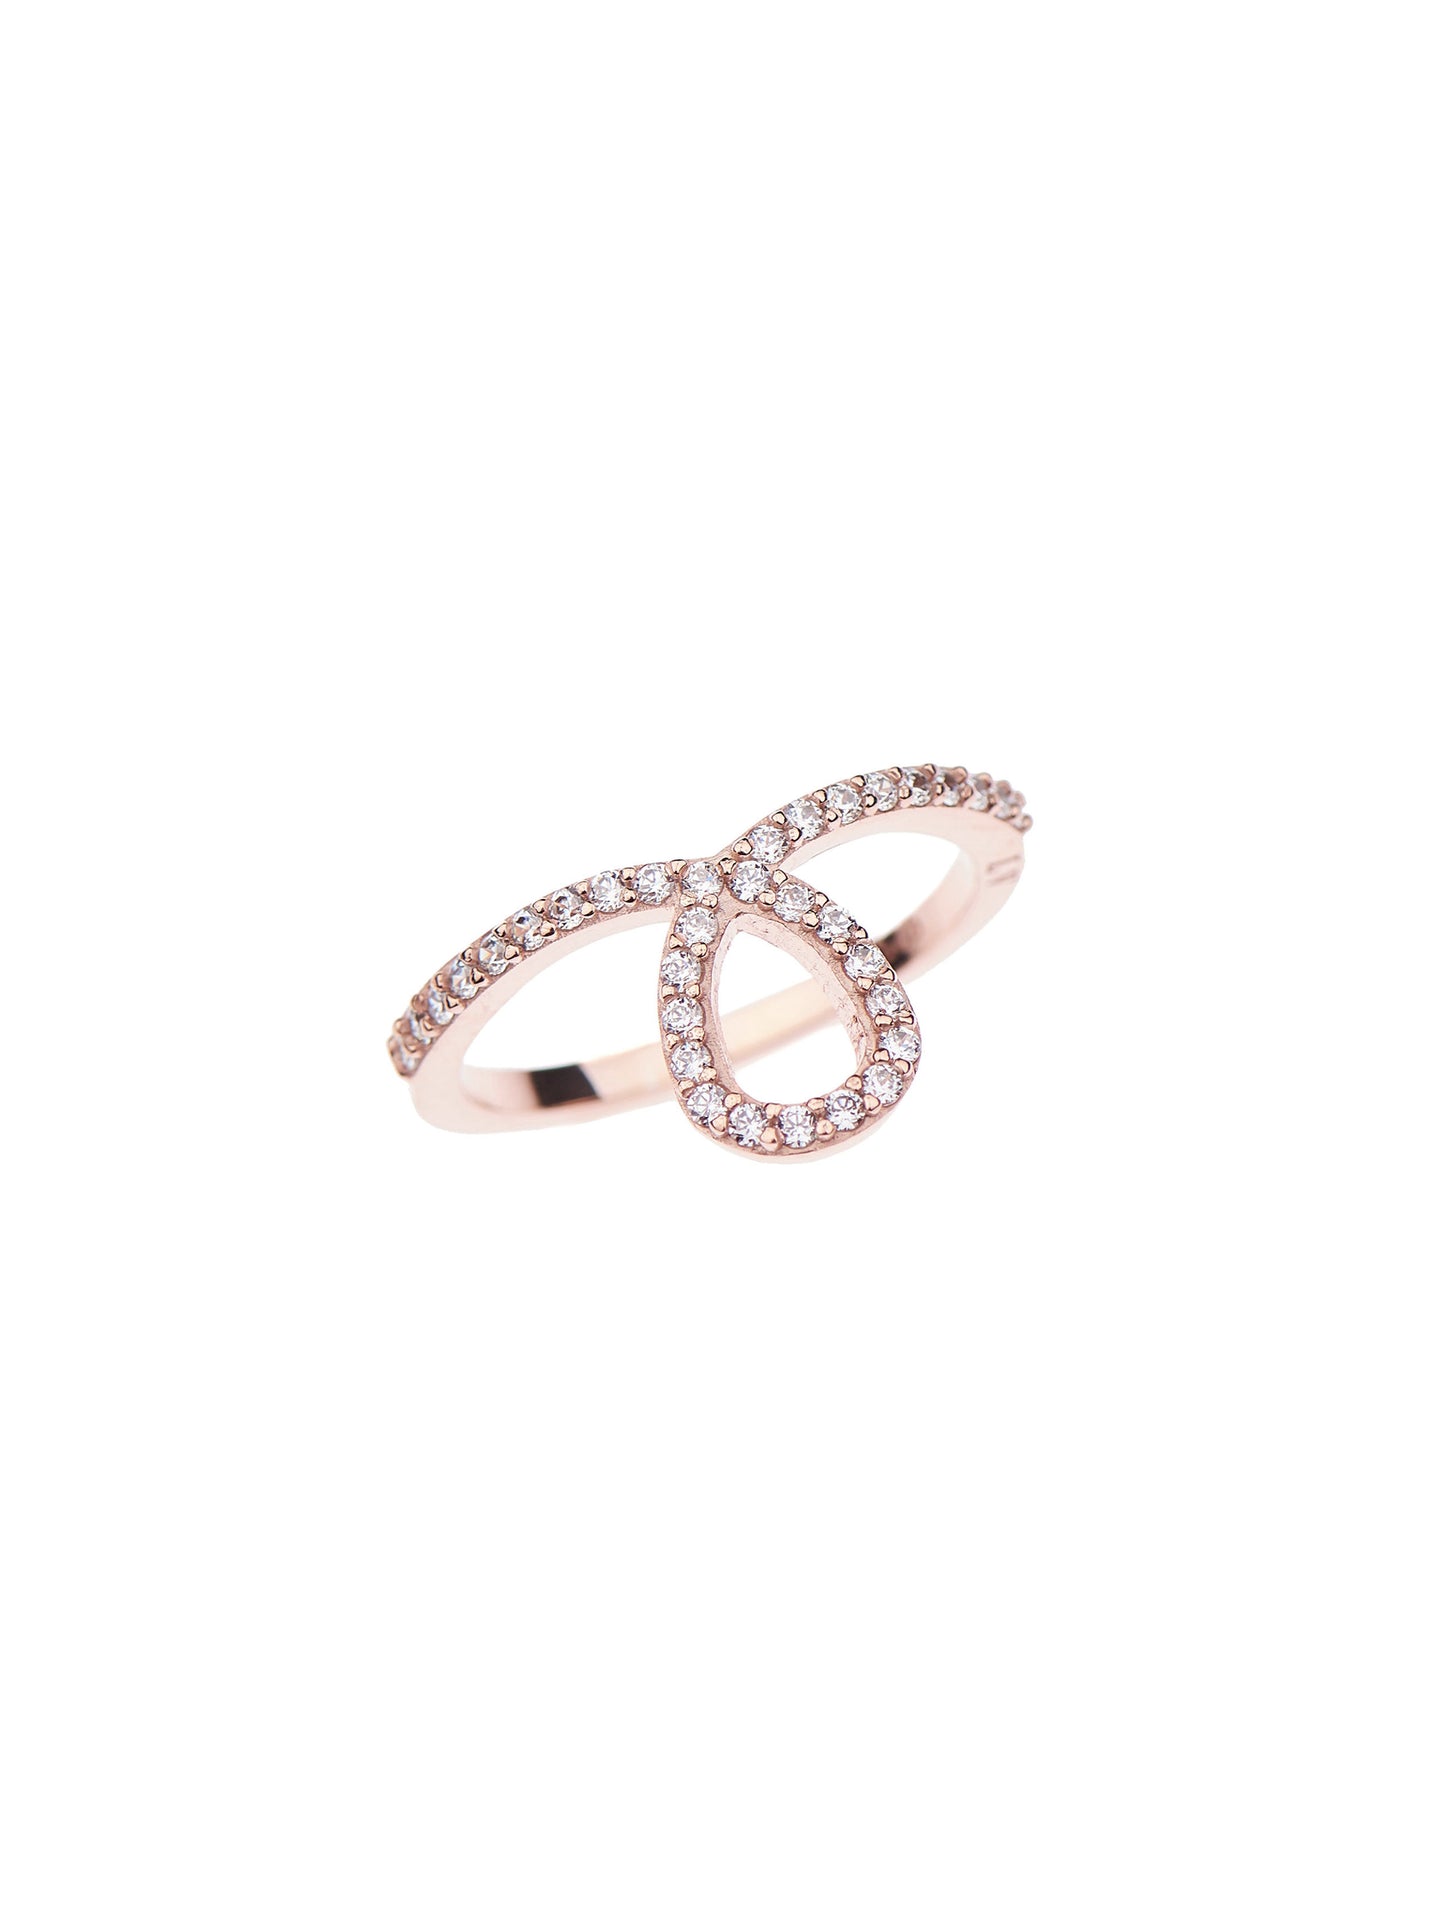 Corona Ring - Pink Gold Plated